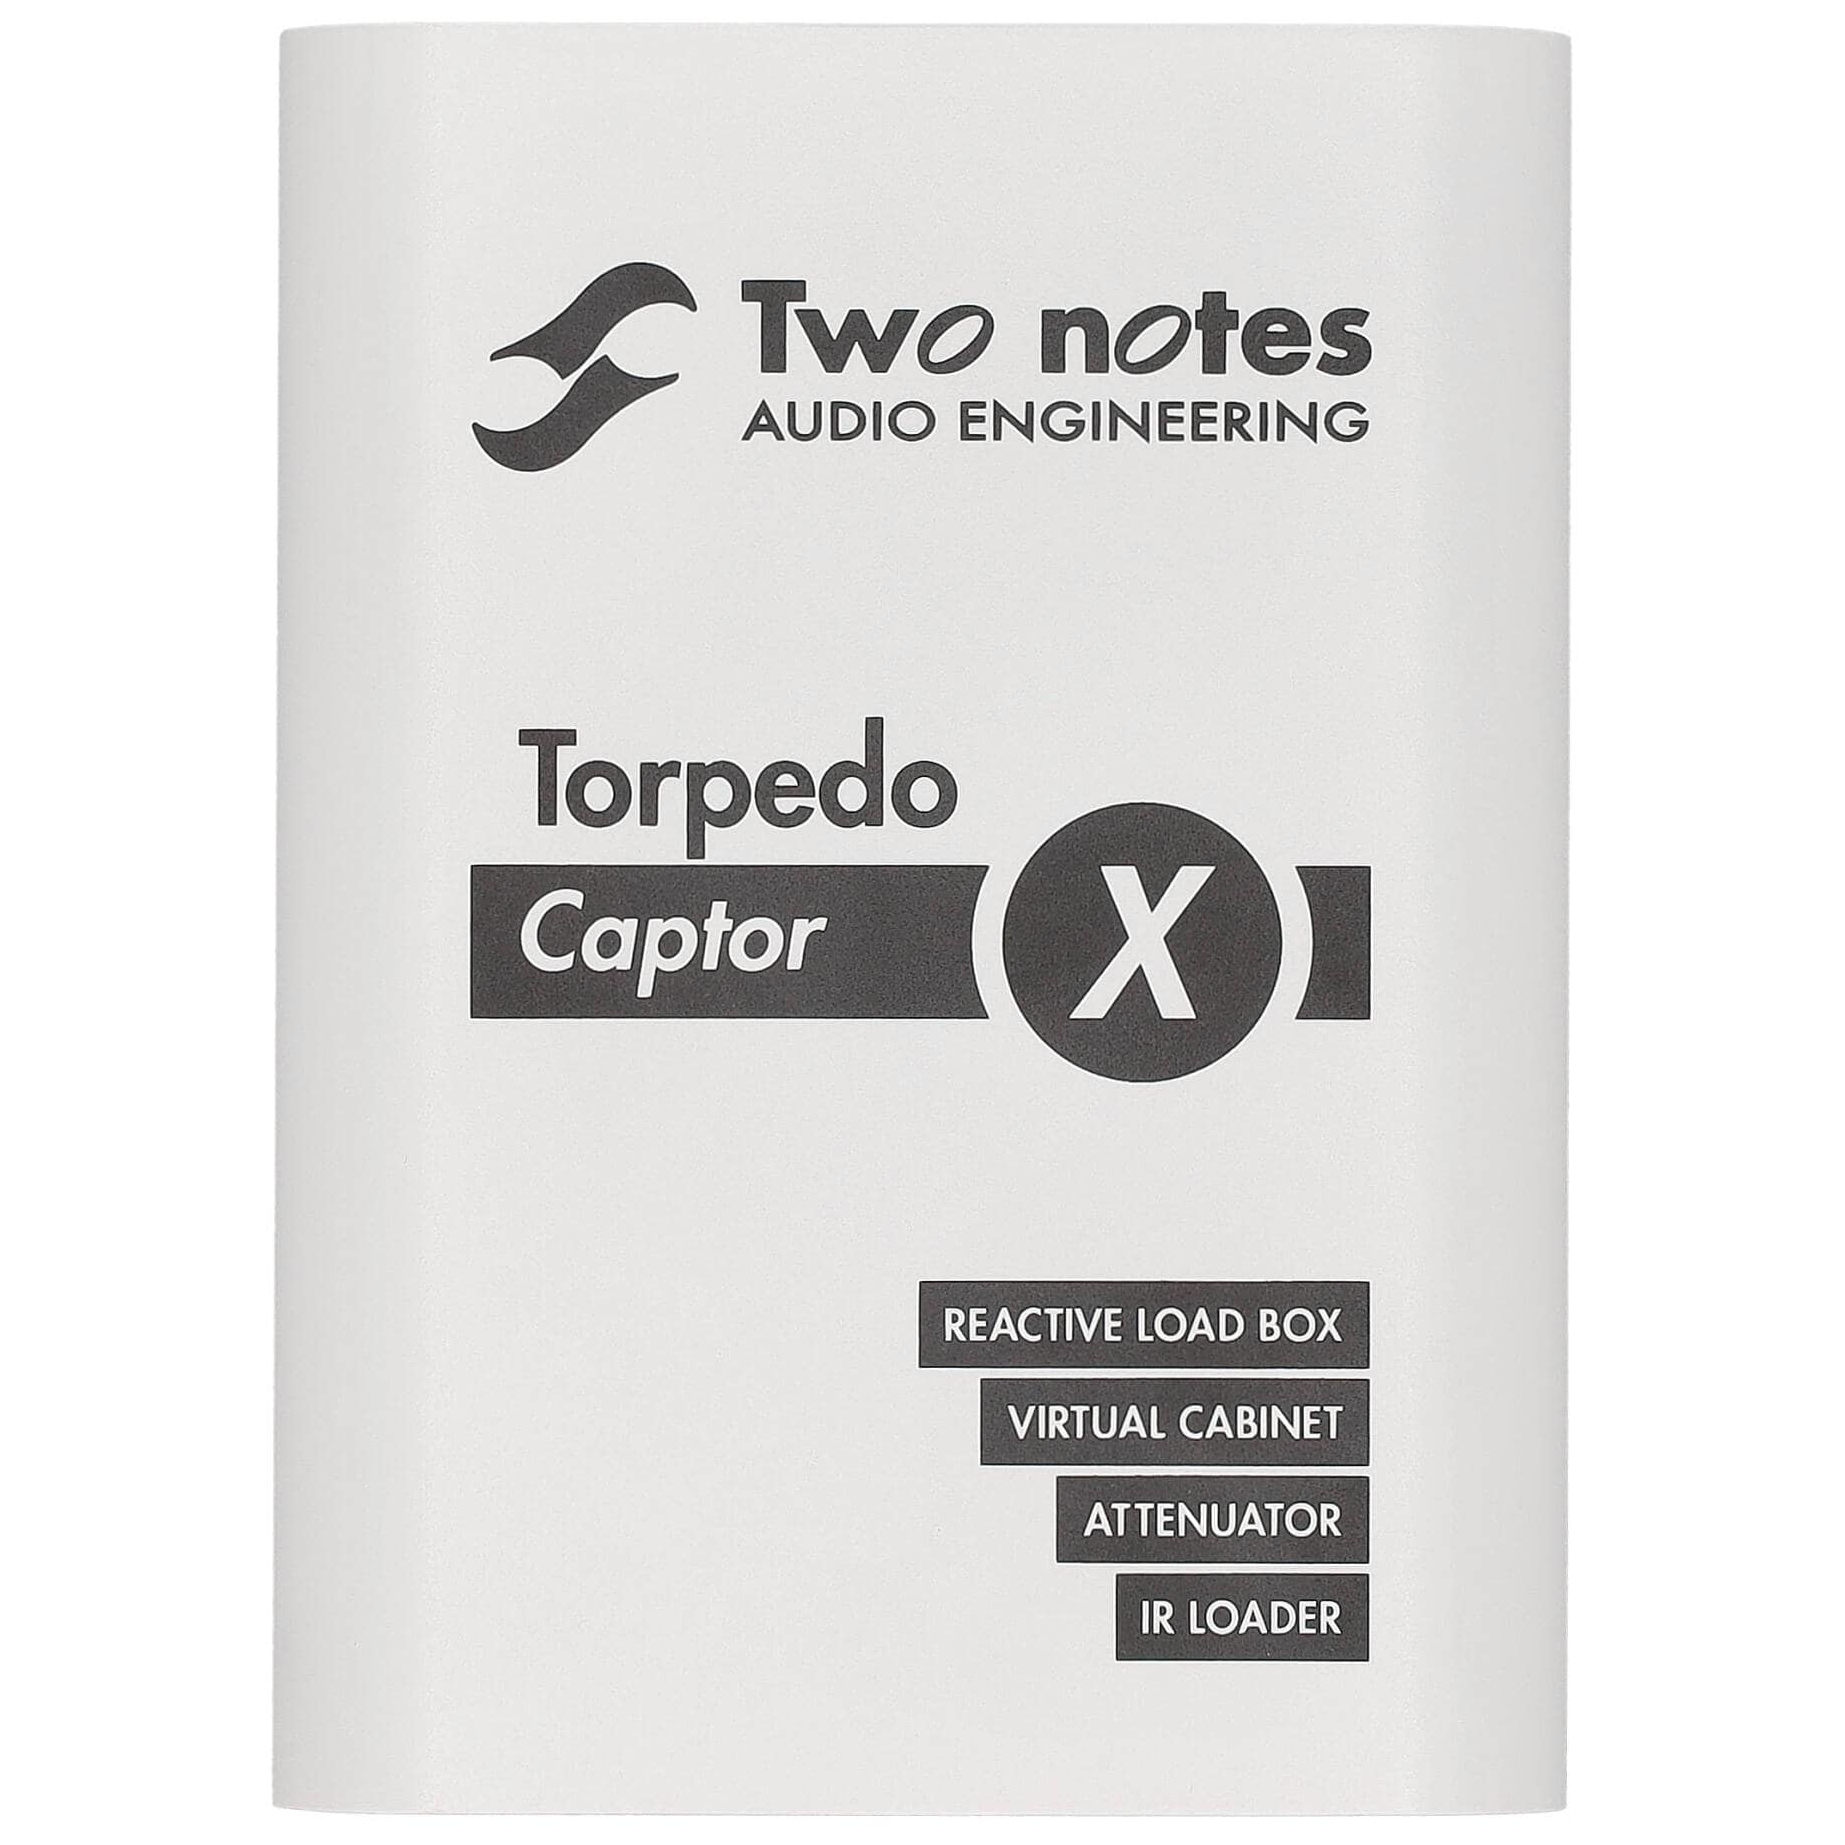 Two Notes Torpedo Captor X B-Ware